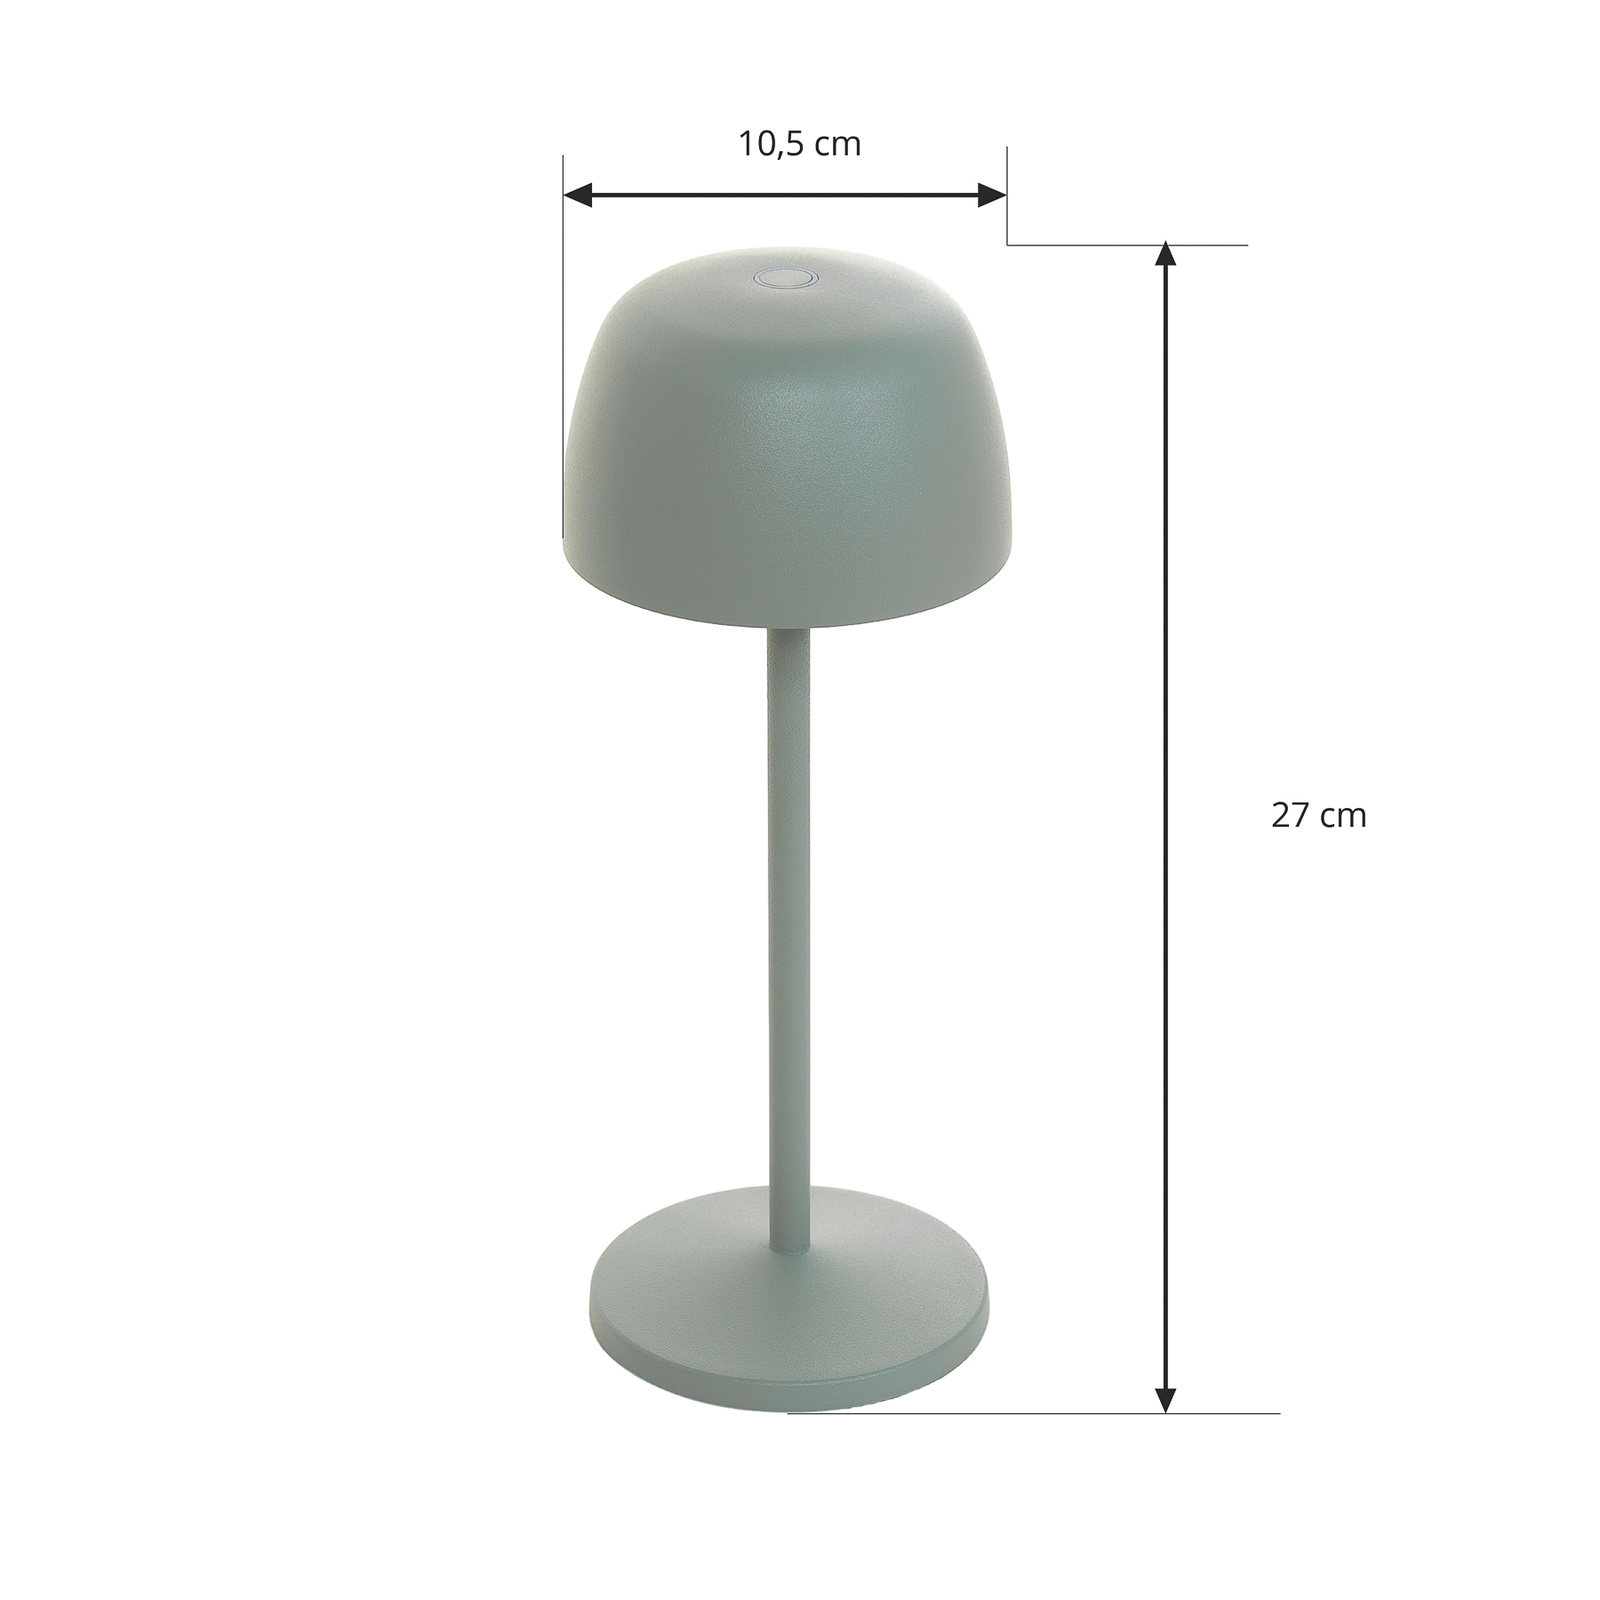 Lindby LED table lamp Arietty, sage green, set of 3